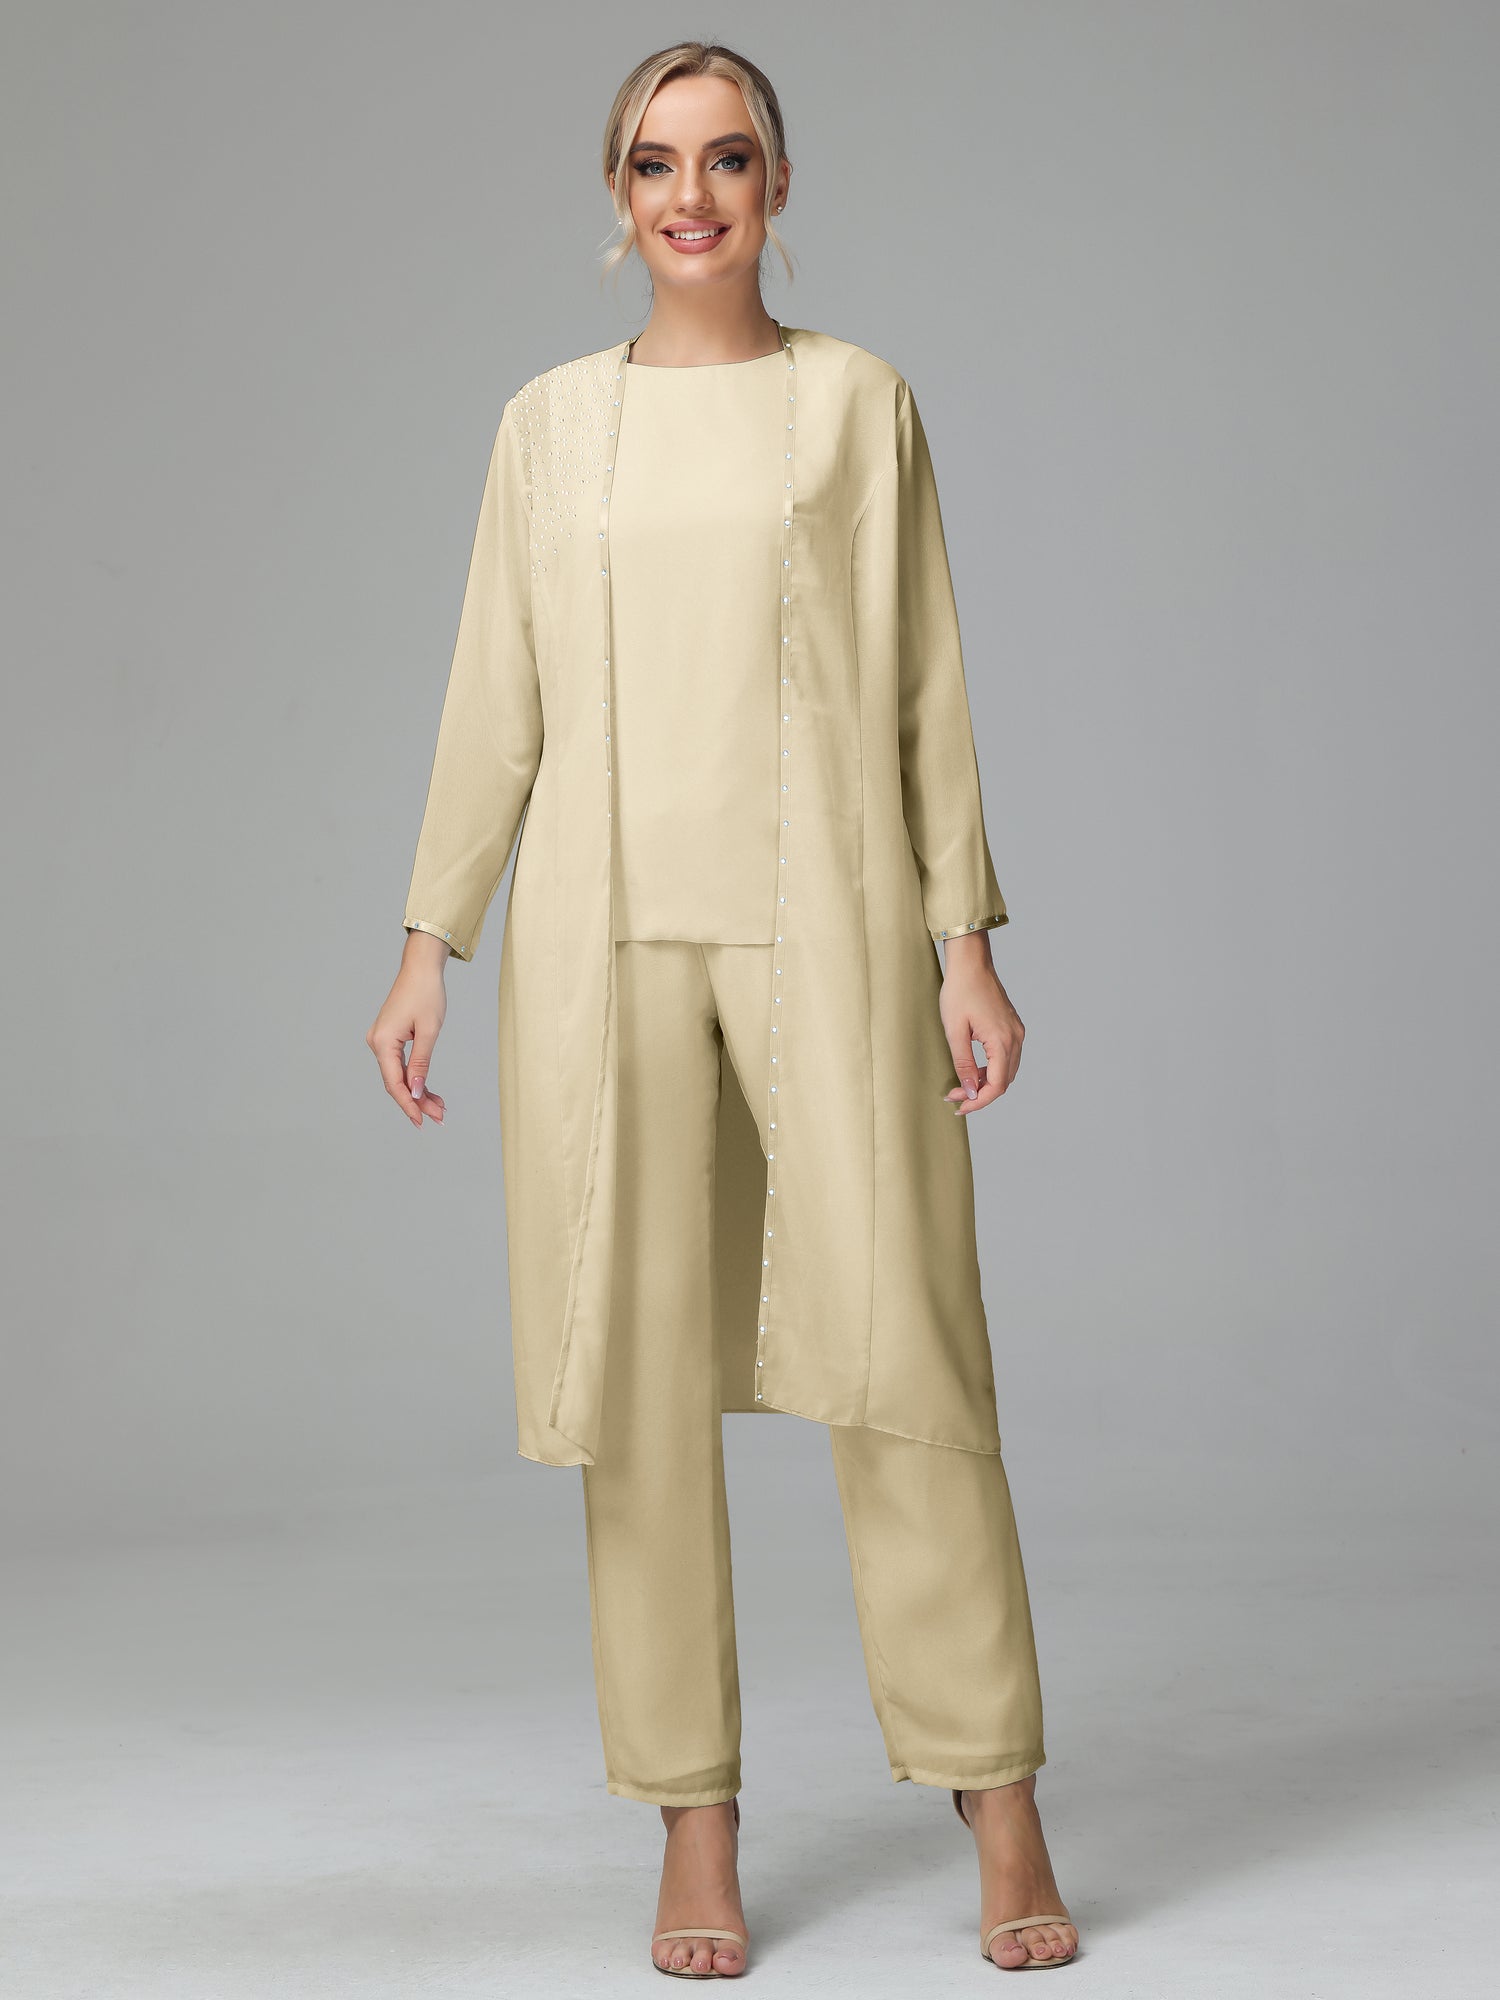 Long Sleeves Chiffon Mother of the Bride Dress Pant Suits